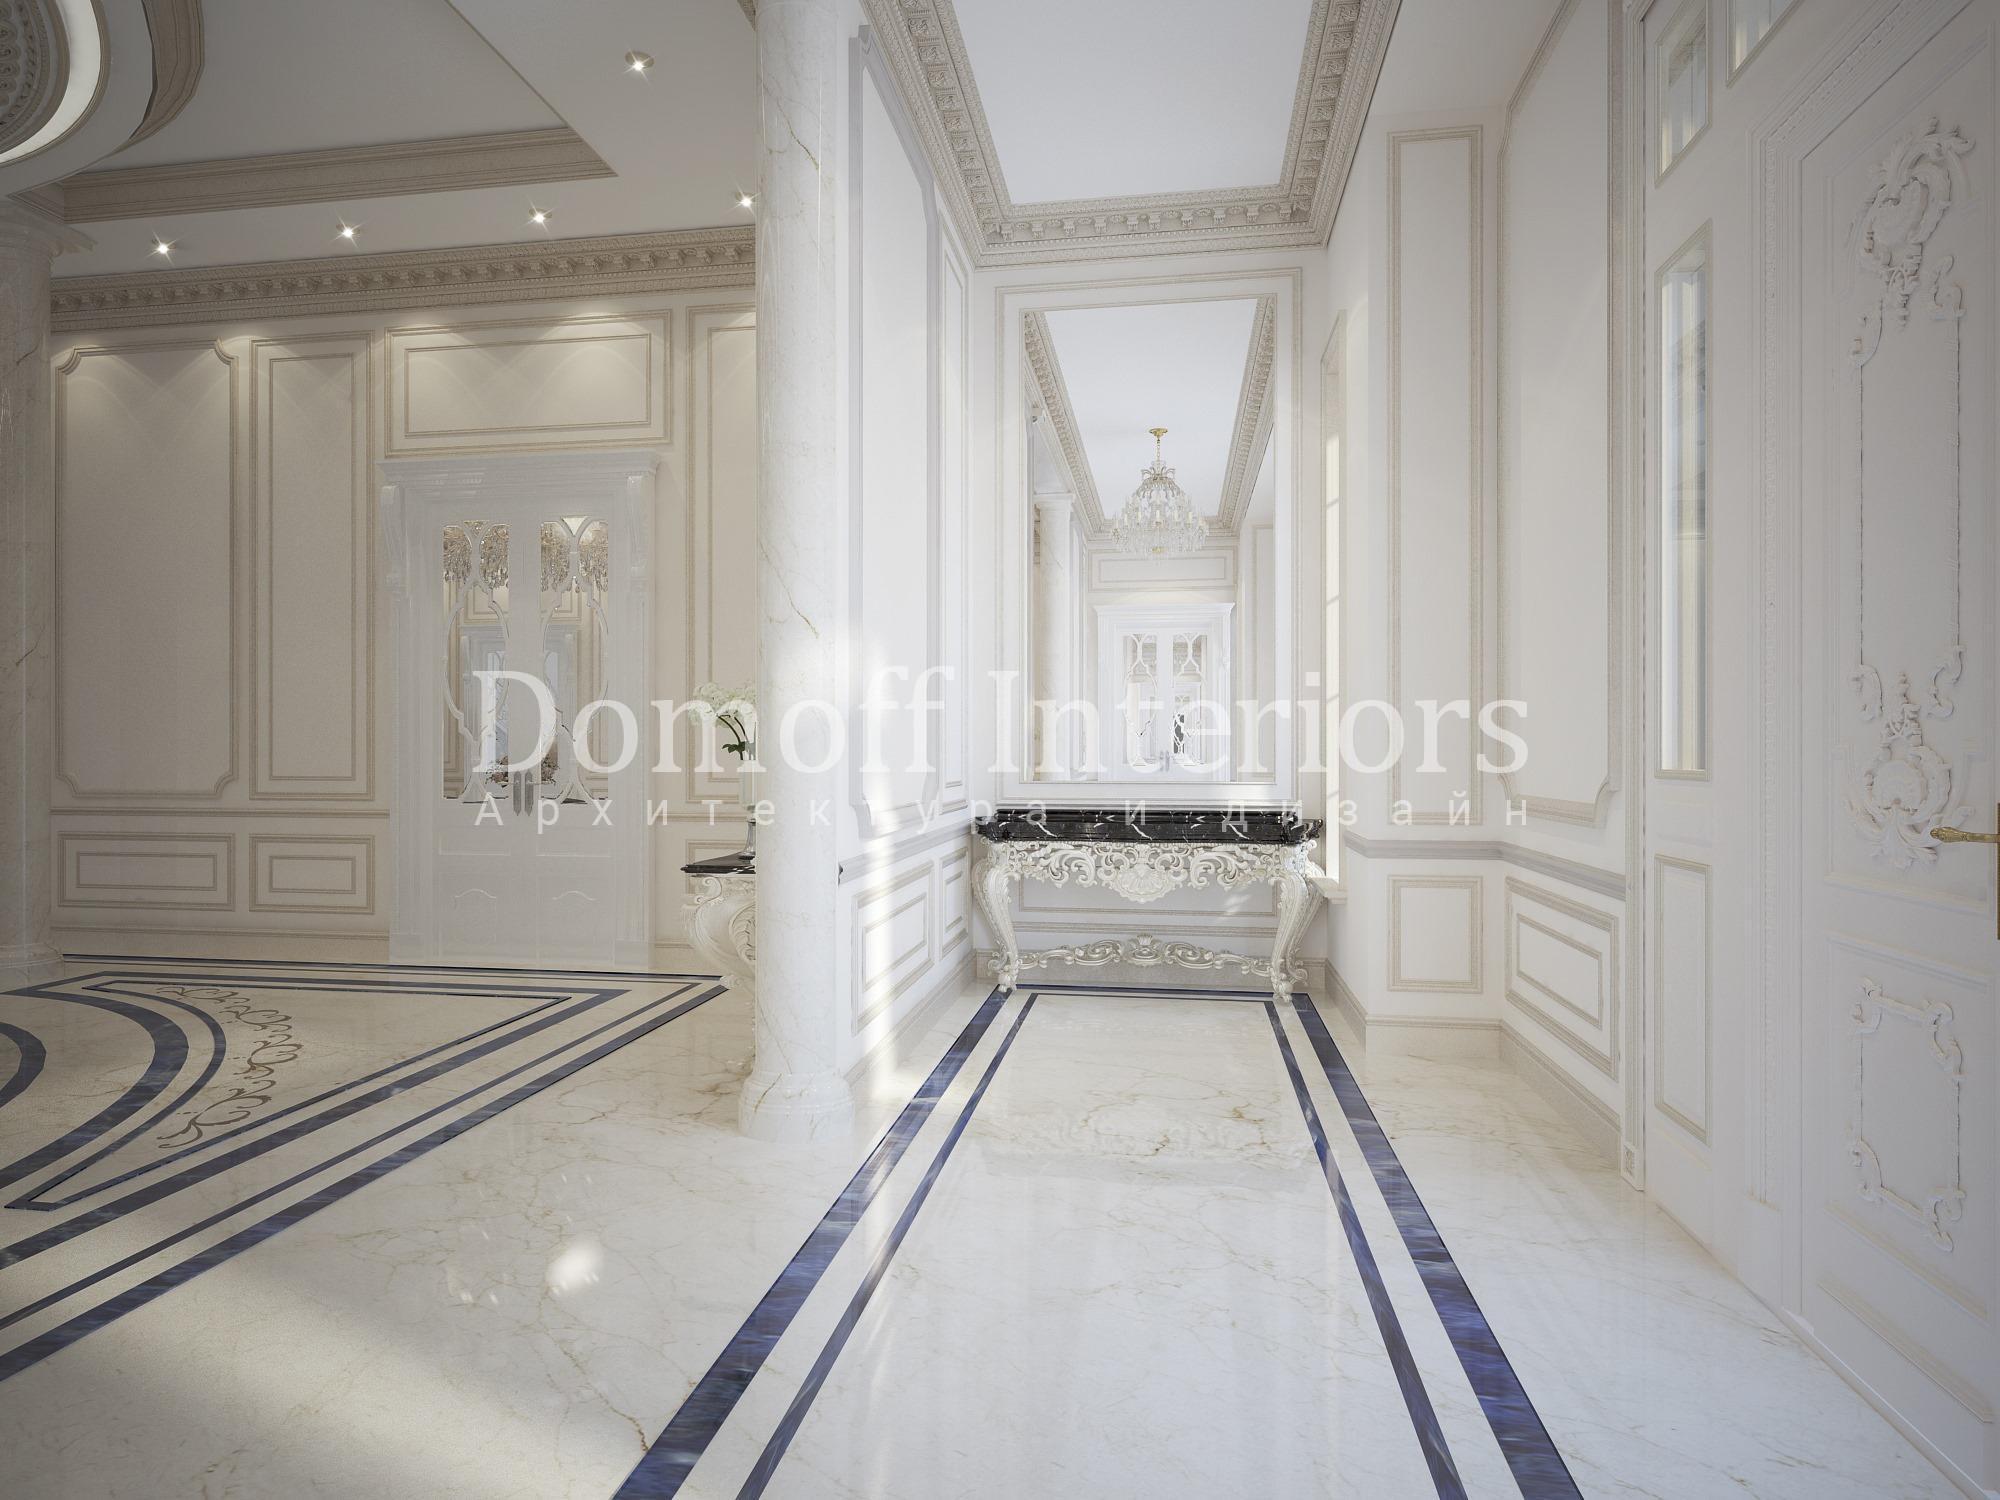 Entrance hall made in the style of Classics